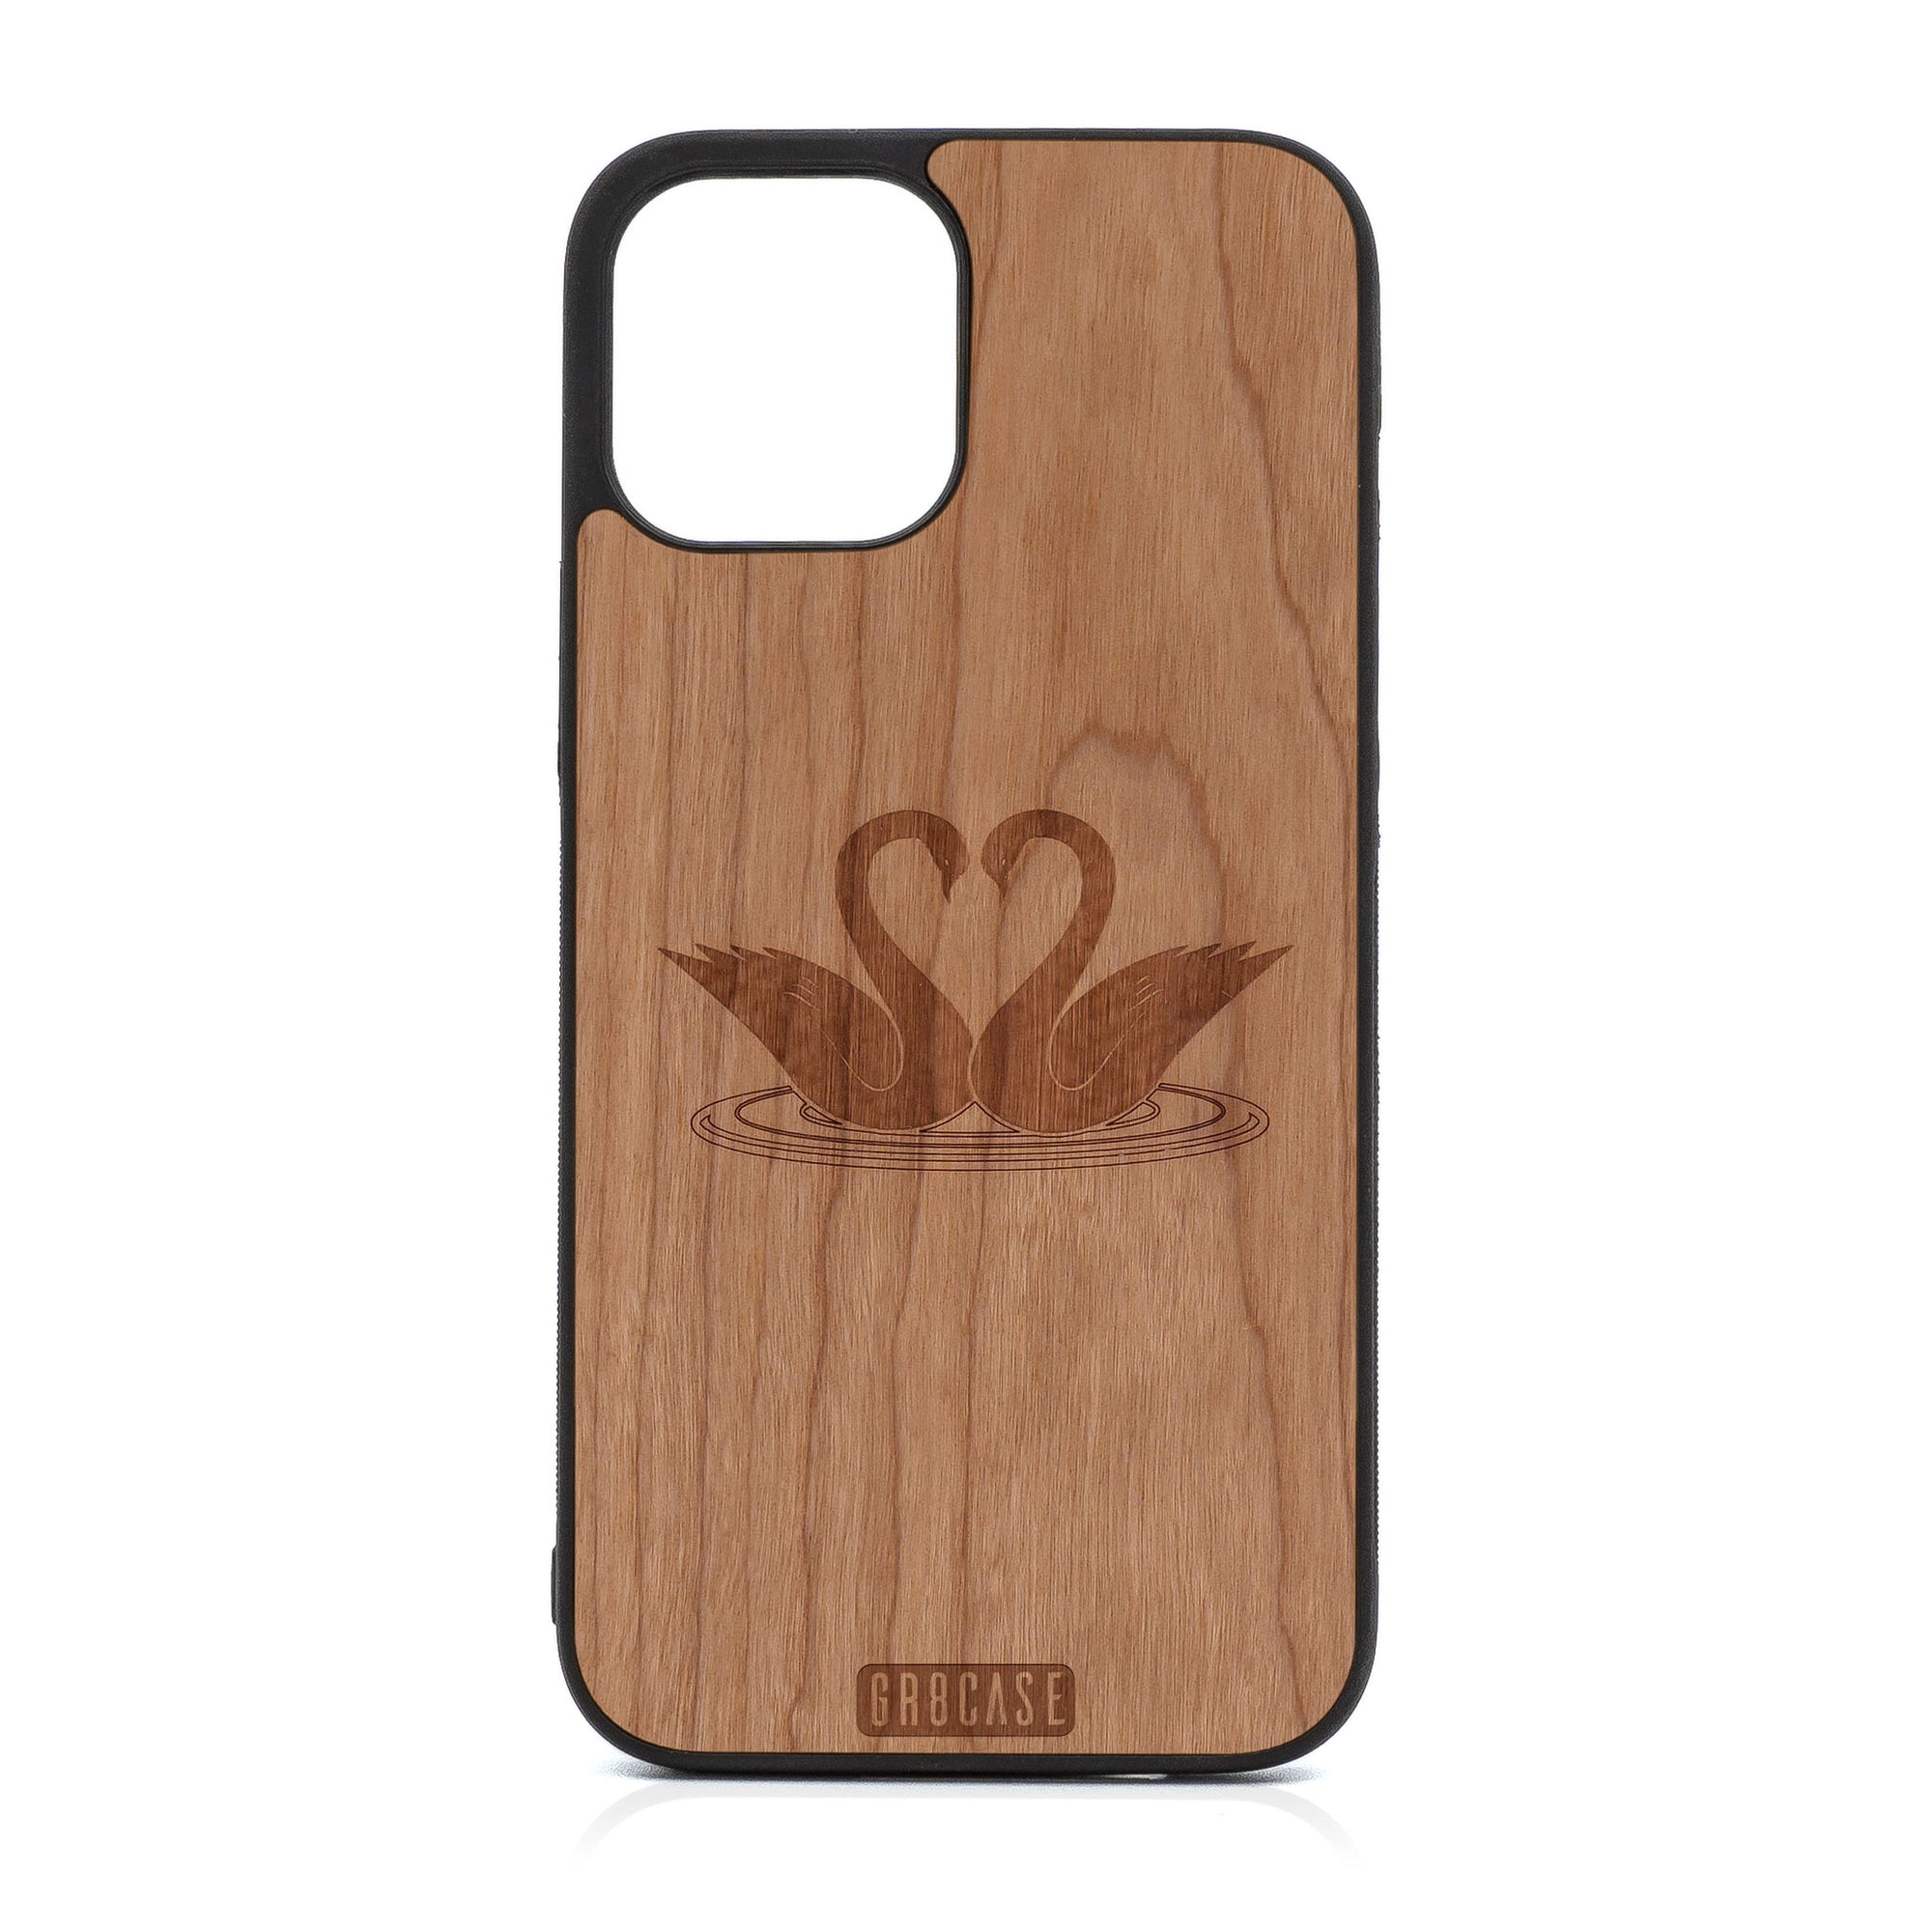 Swans Design Wood Case For iPhone 12 Pro Max